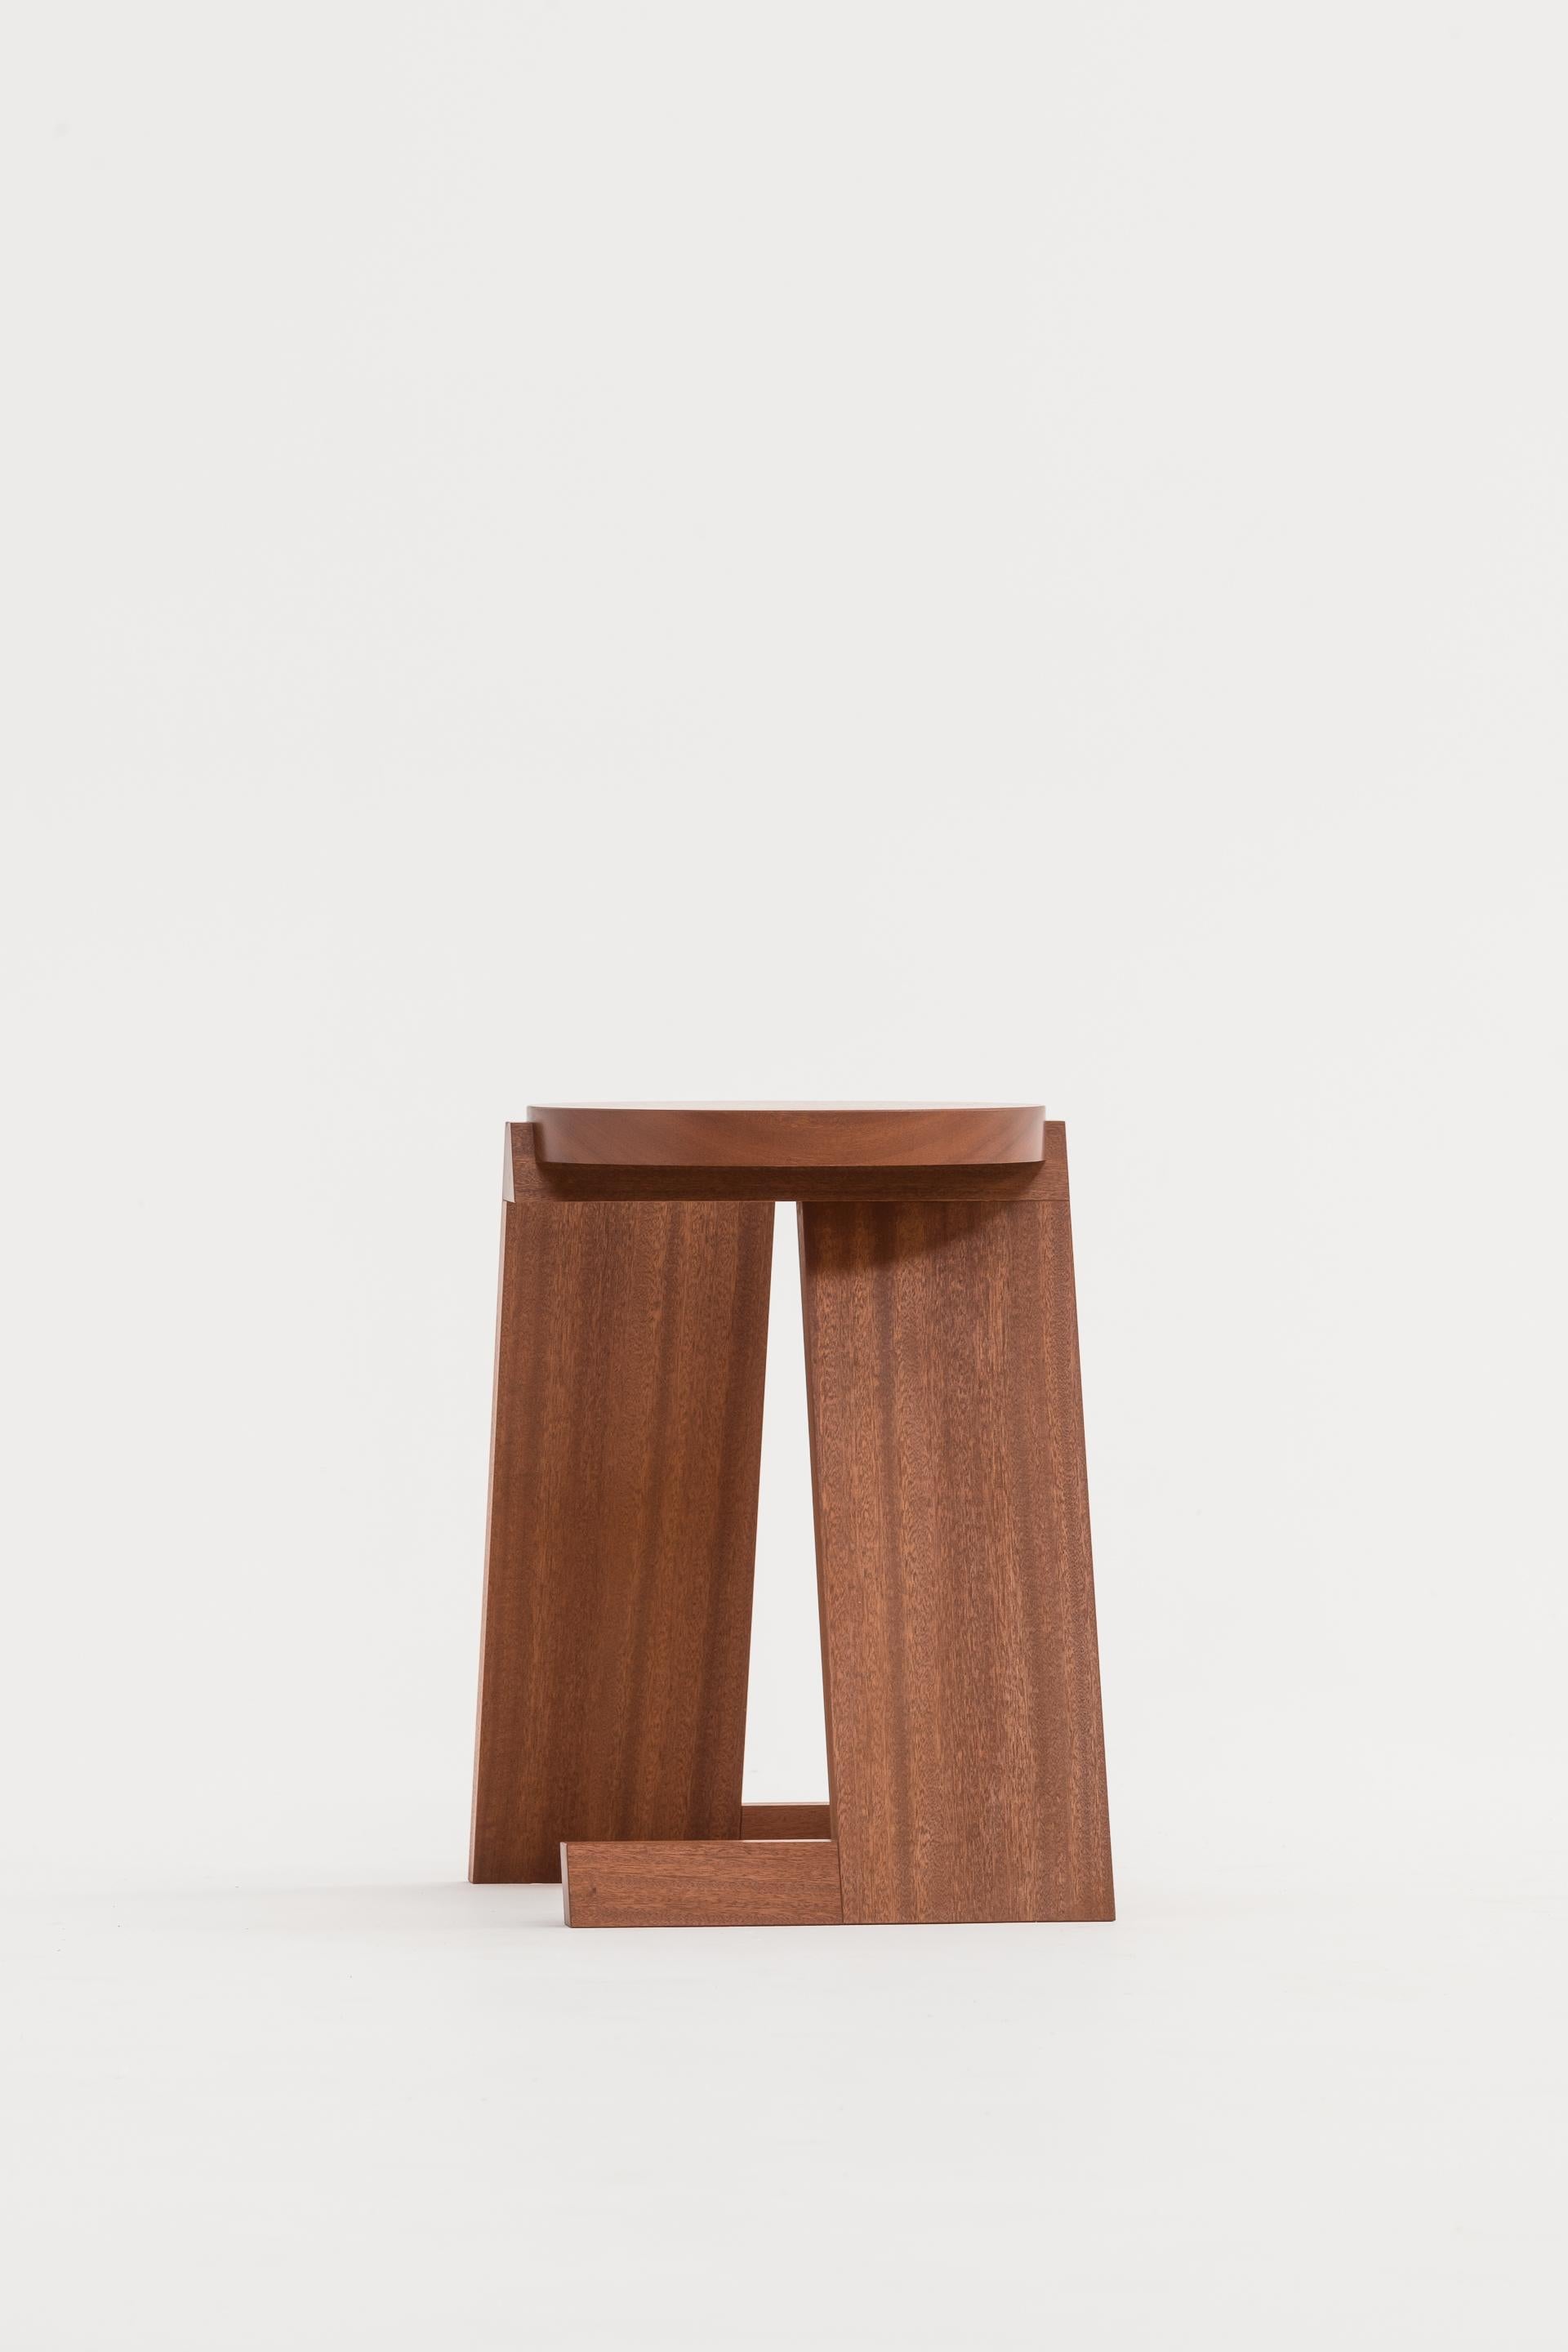 Aleksander Oniszh Pawn Stool by Nów In New Condition For Sale In Geneve, CH